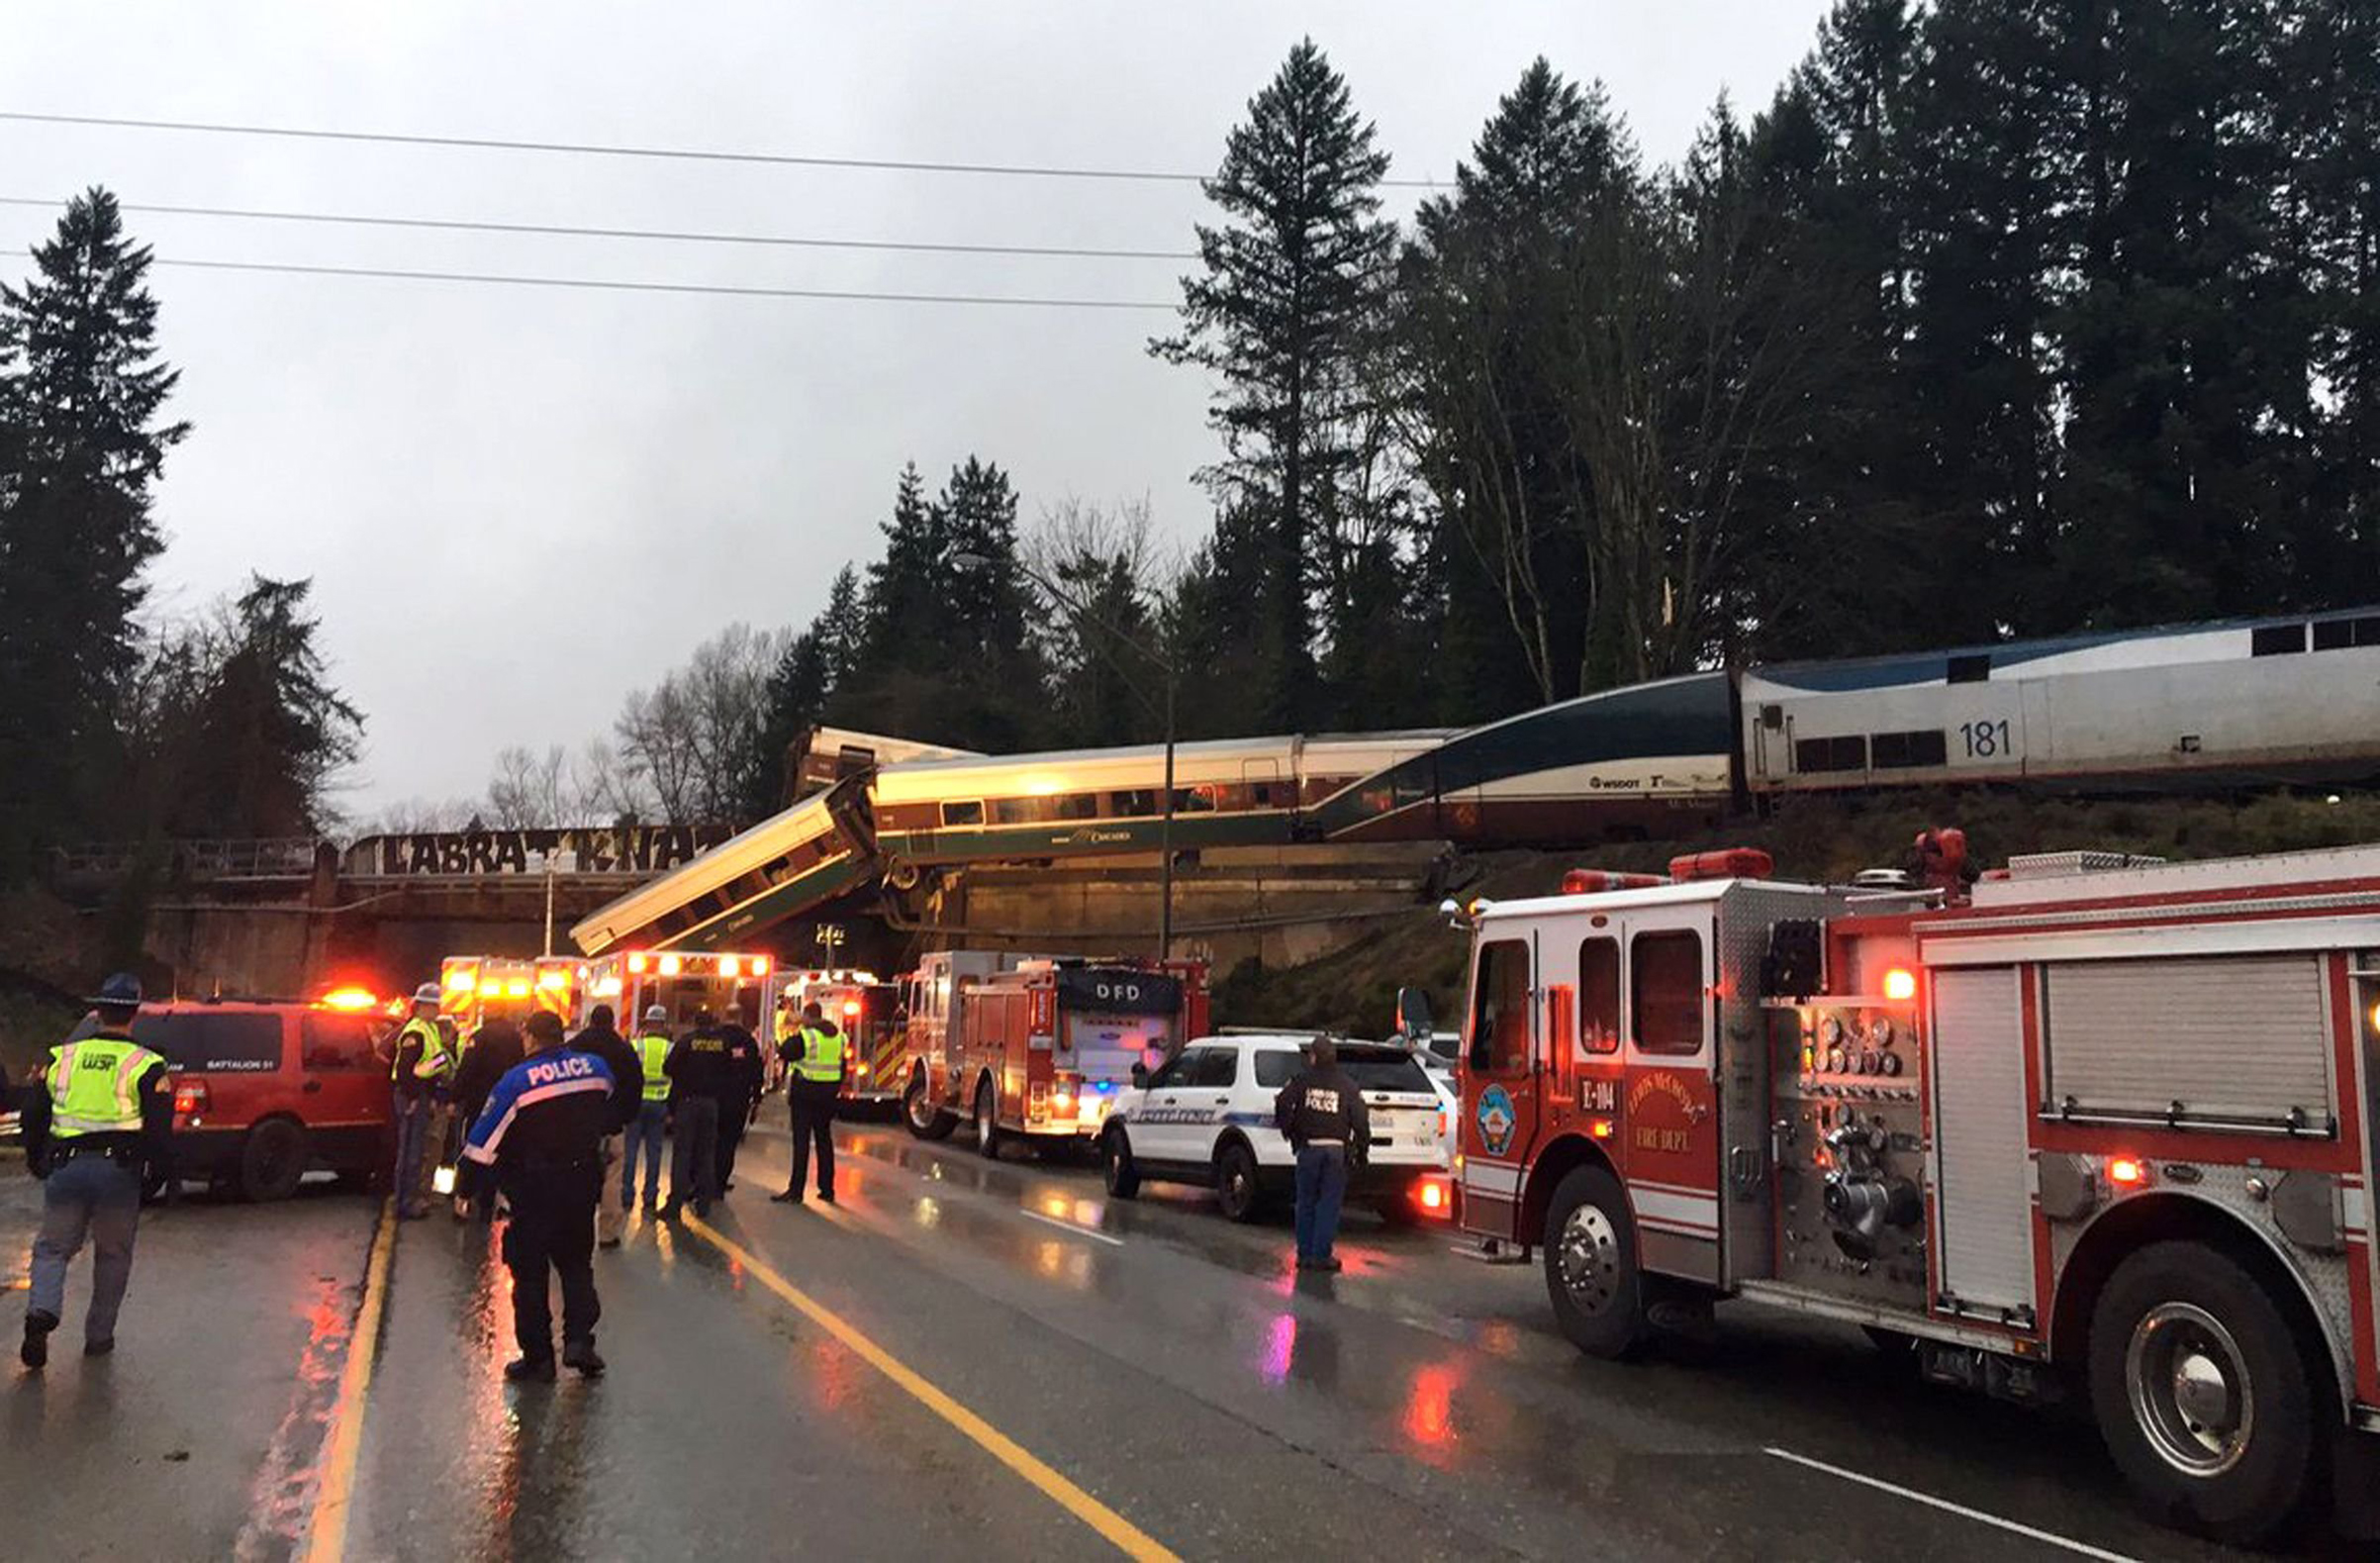 An Amtrak train that was derailed south of Seattle on Dec. 18, 2017. Authorities reported 